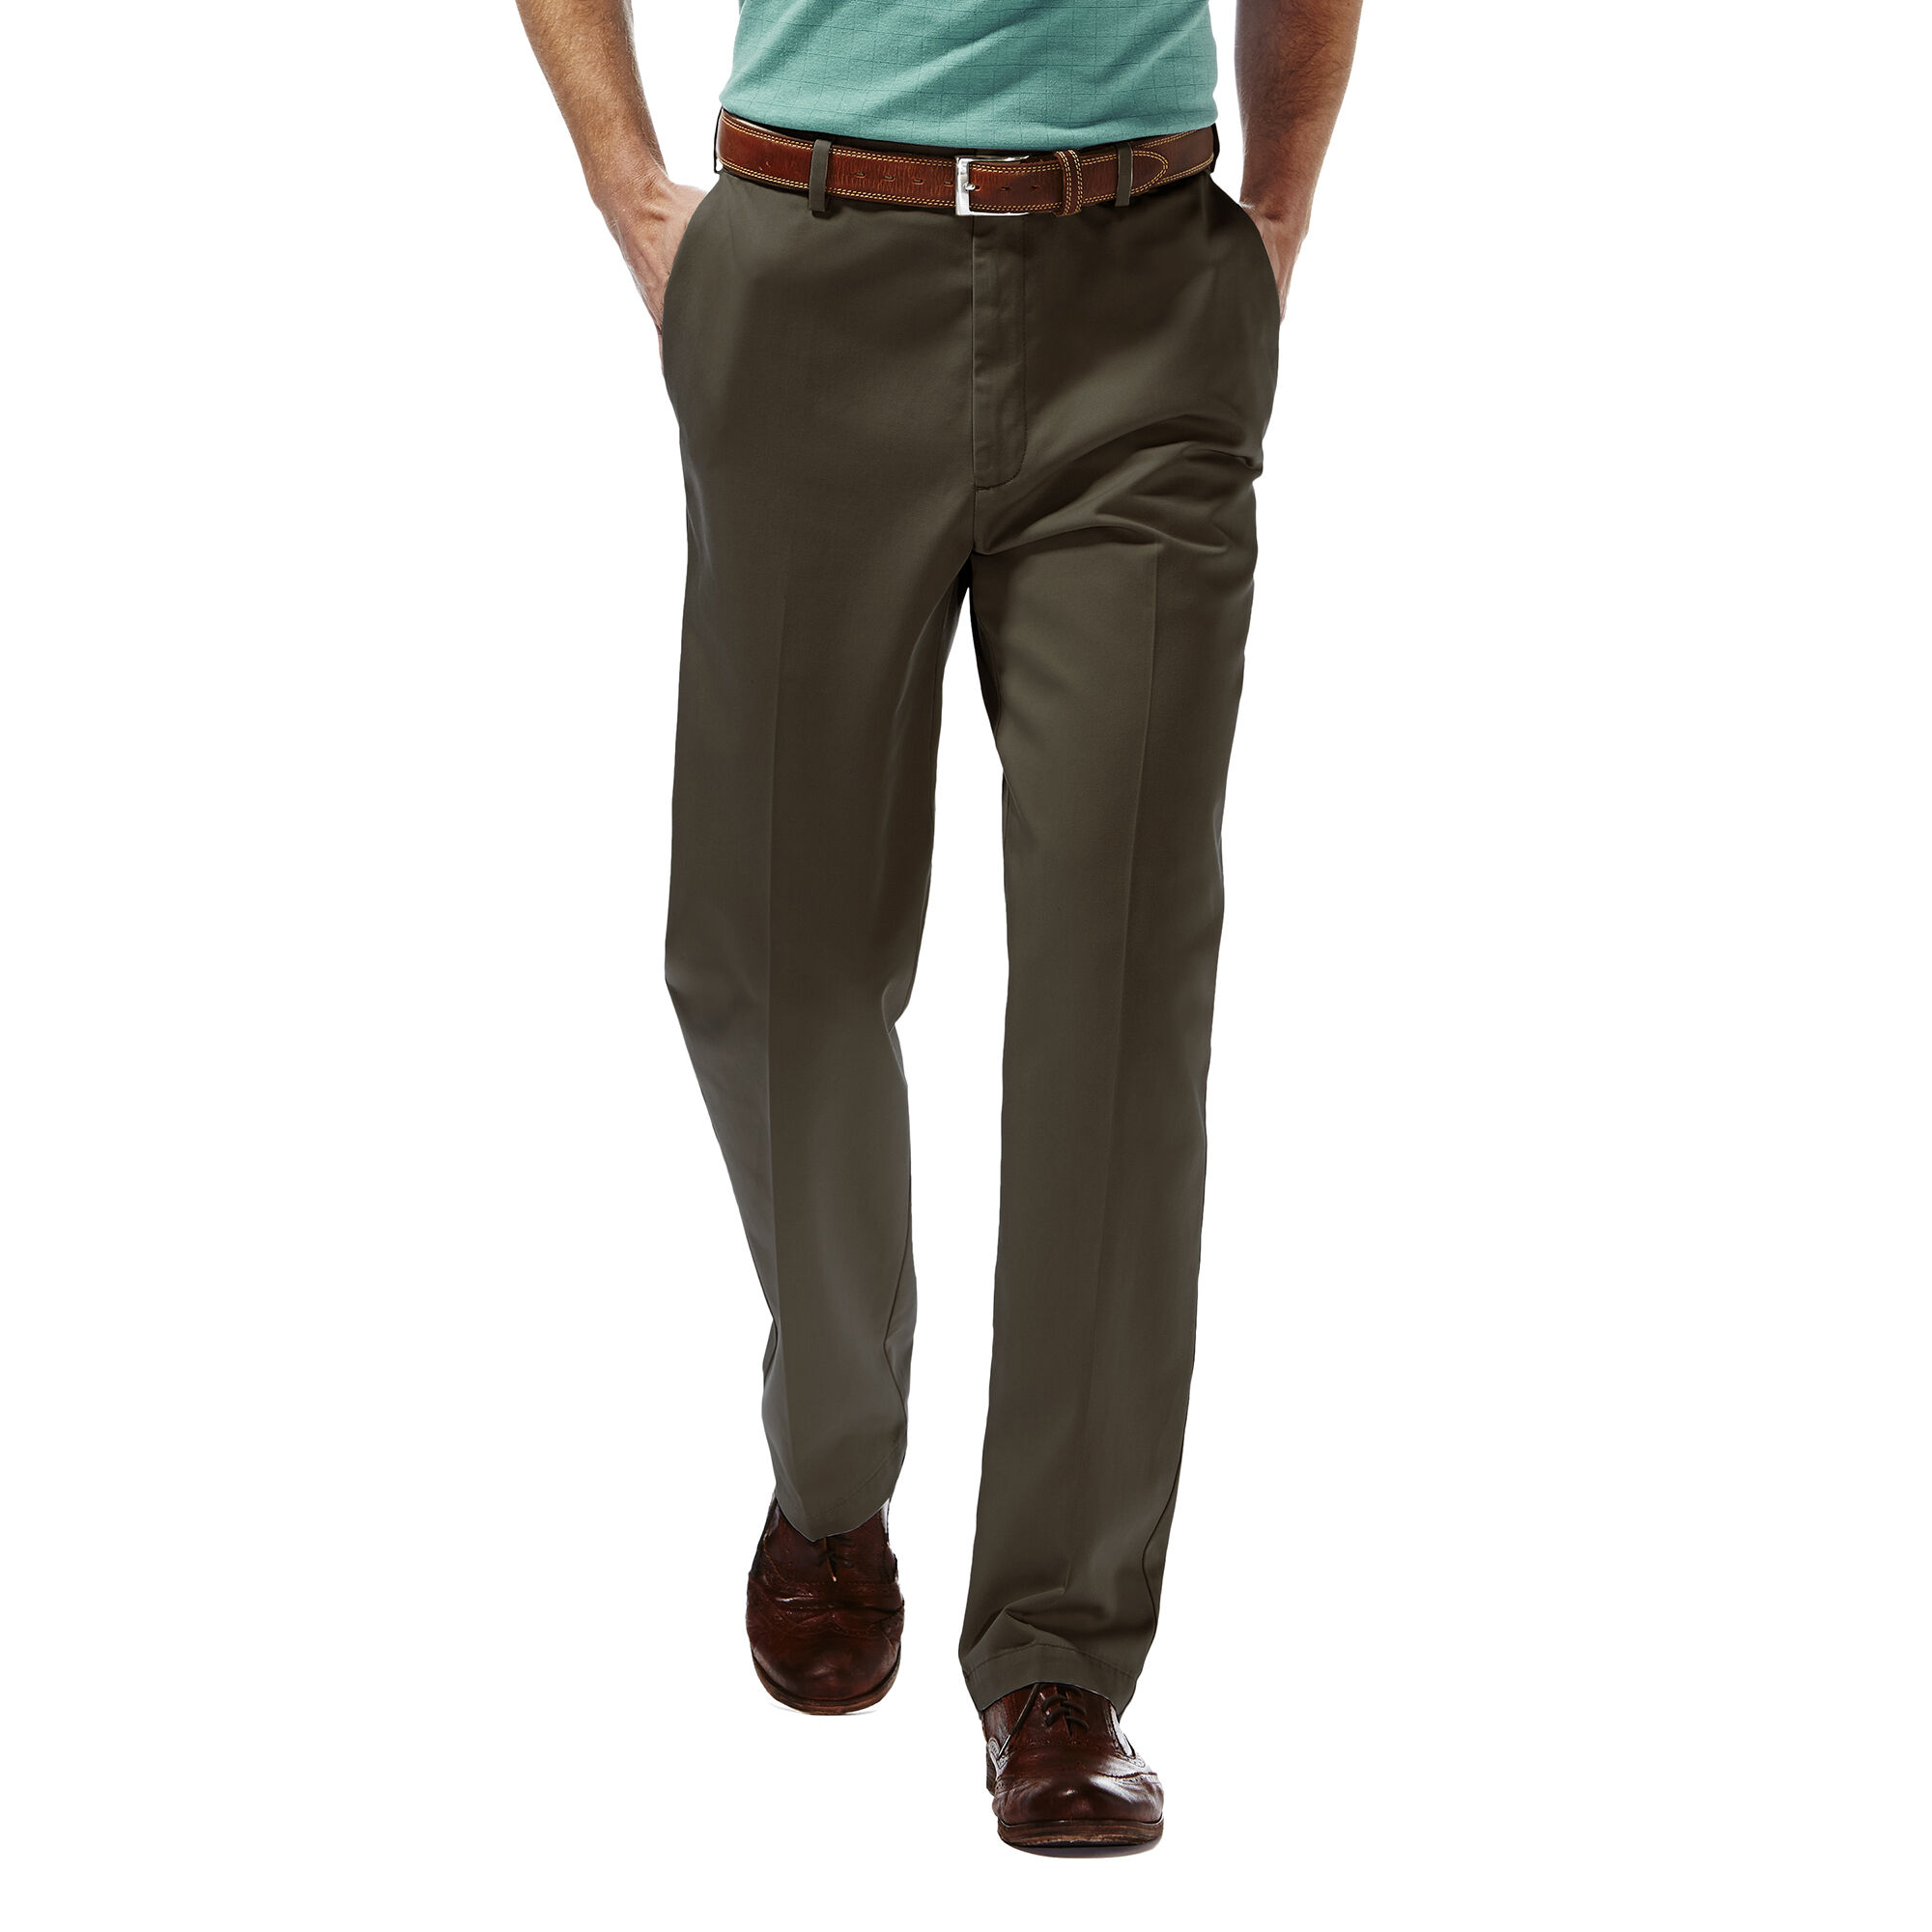 NWT Men's Haggar Work-To-Weekend PRO Stretch Flat-Front Pants Khaki 40x30 